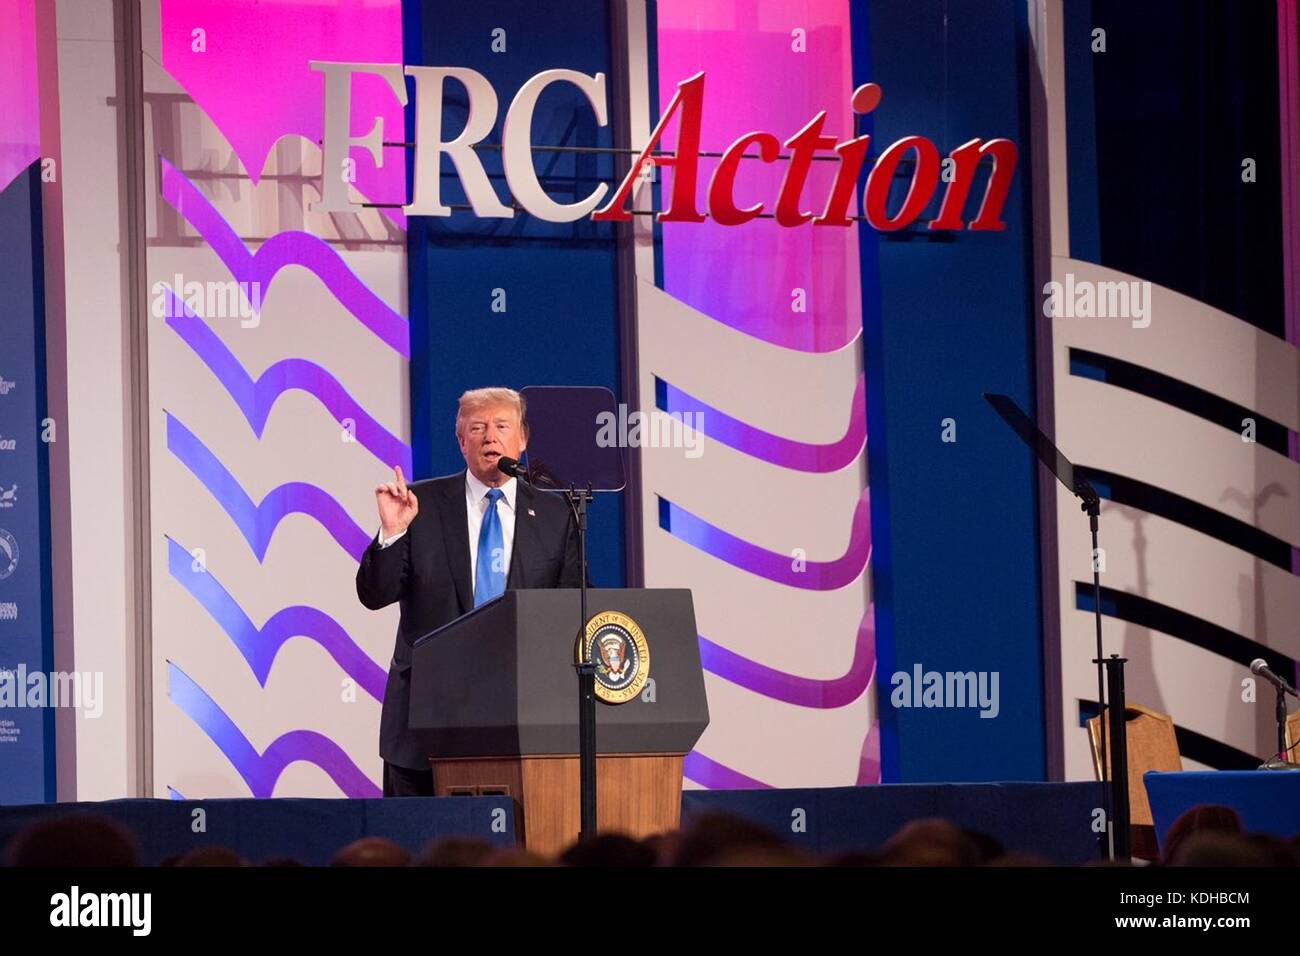 U.S. President Donald Trump addresses the Values Voter Summit annual gathering of Christian leaders October 13, 2017 in Washington, D.C. Trump is the first sitting president to attend the event hosted by the Family Research Council, a group that has been labeled a hate group by the Southern Poverty Law Center. Stock Photo